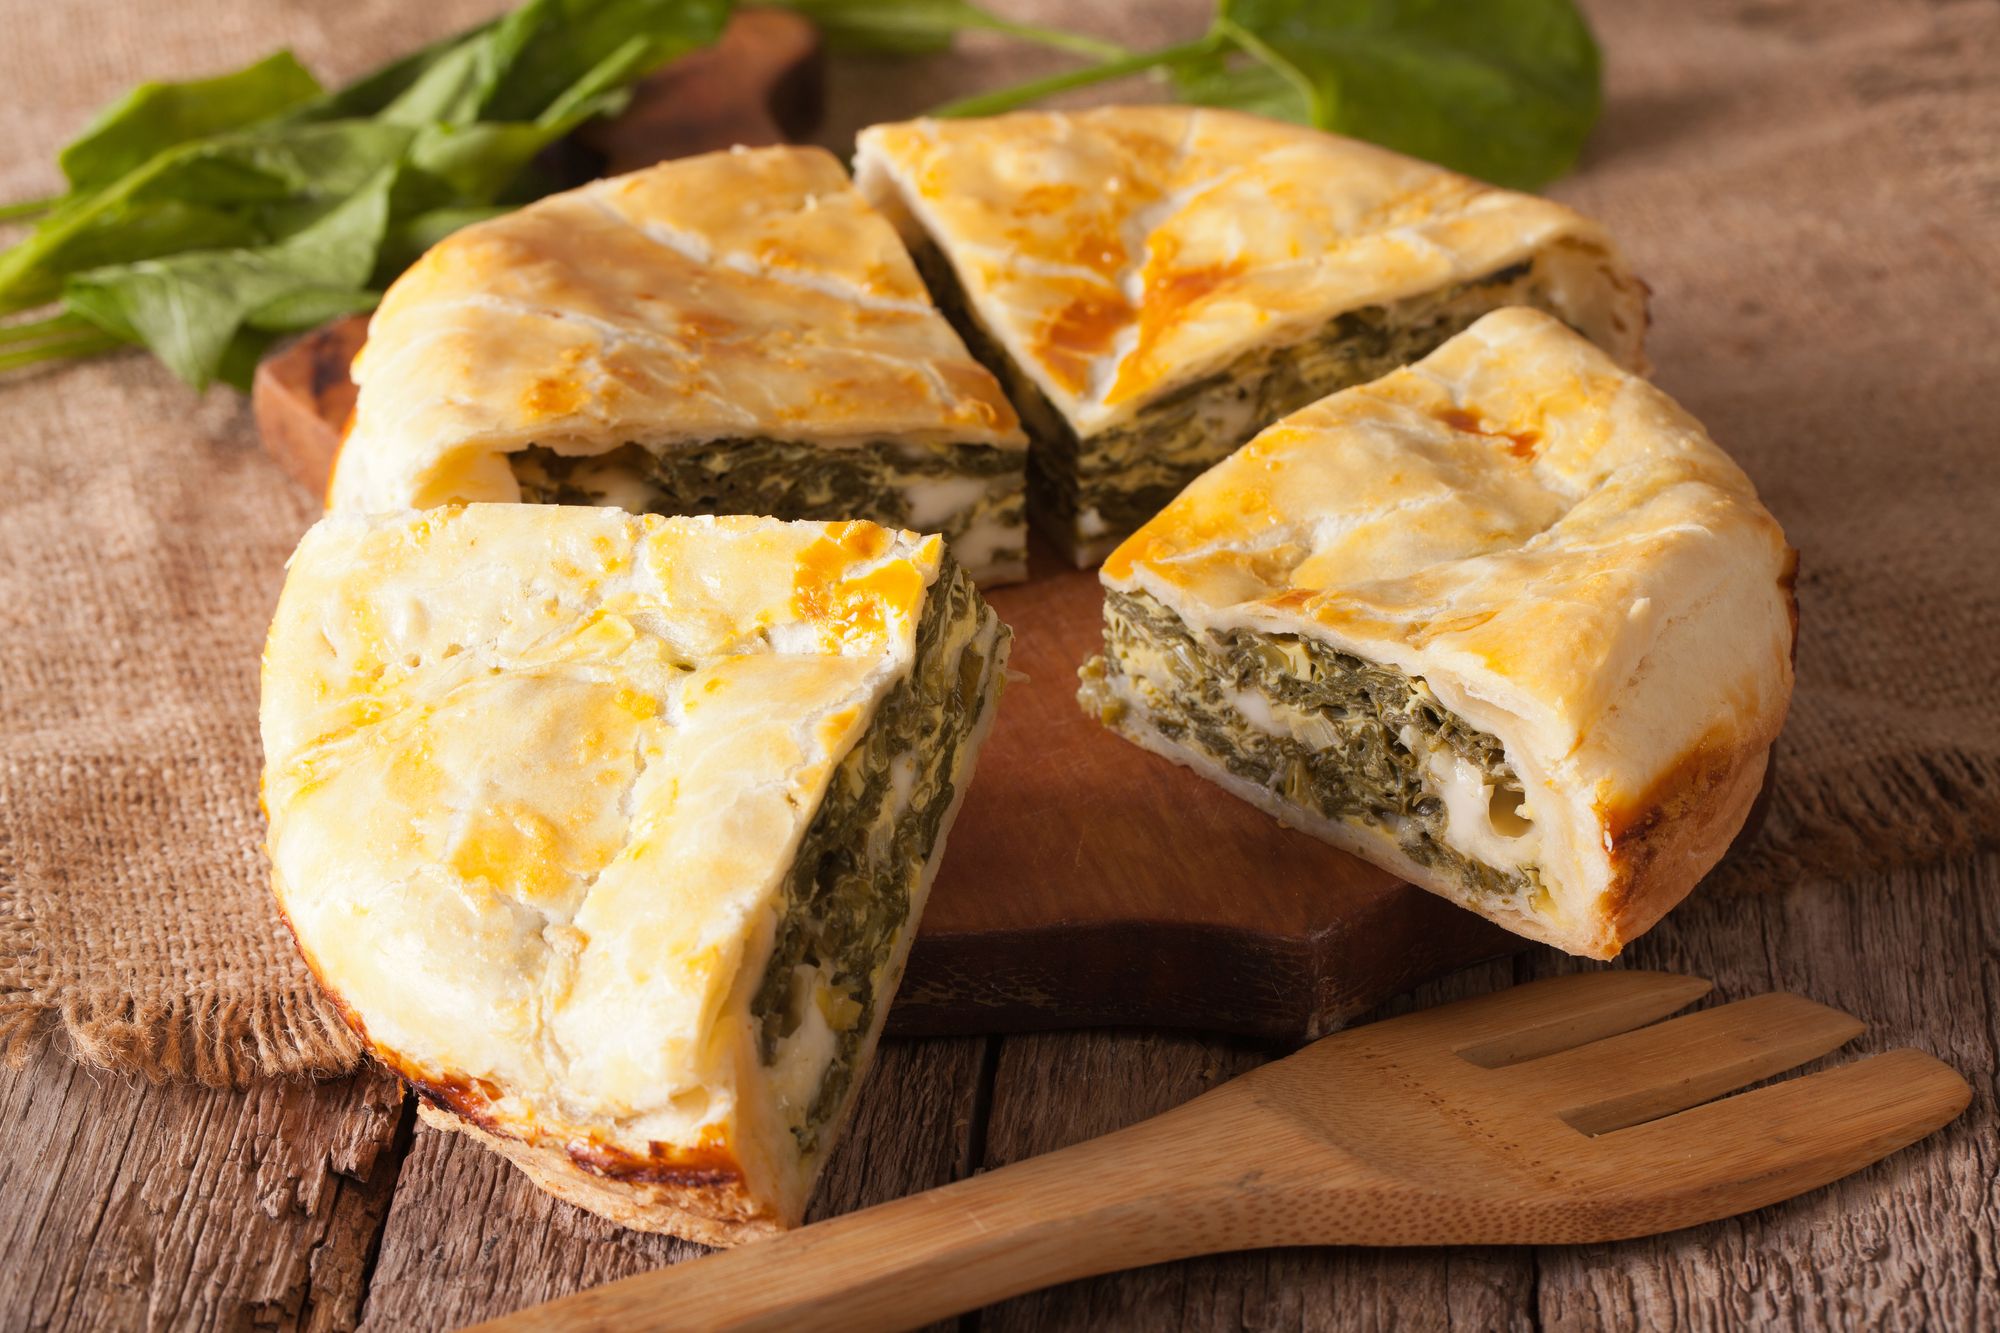 Zeljanica (Spinach and Ricotta Pie)